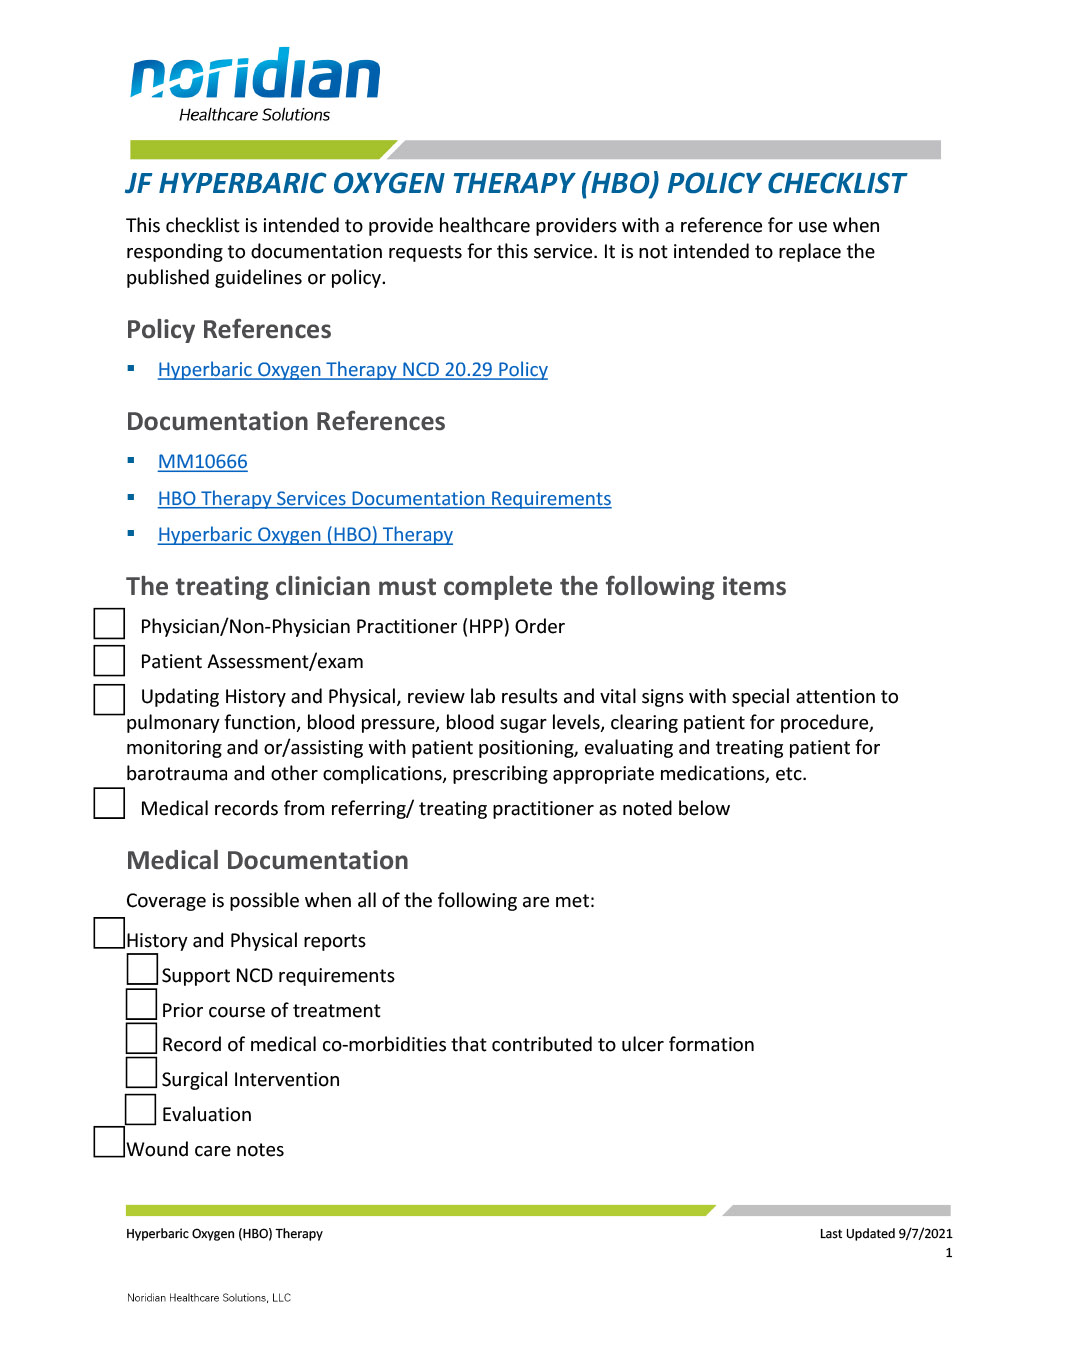 Hyperbaric Oxygen Therapy (HBO) Policy Checklist